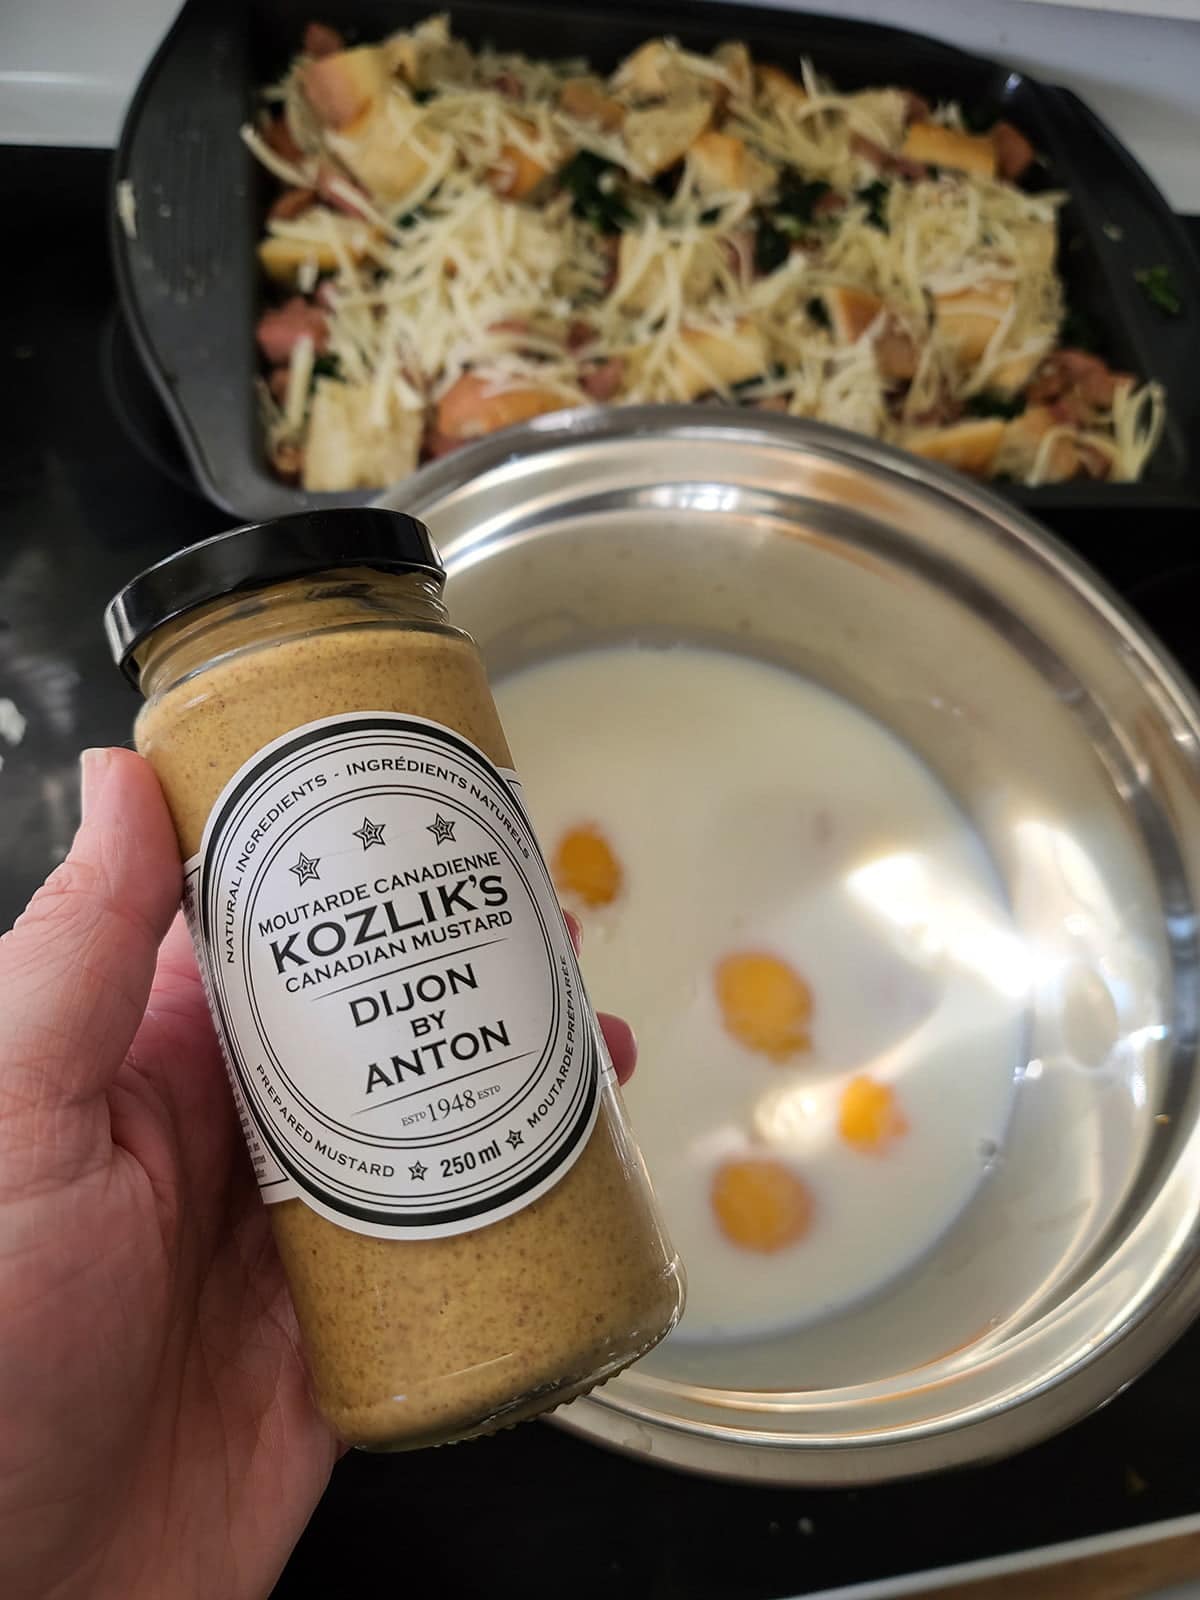 A hand holding a jar of Kozlik's Dijon mustard above a mixing bowl with milk and eggs in it.